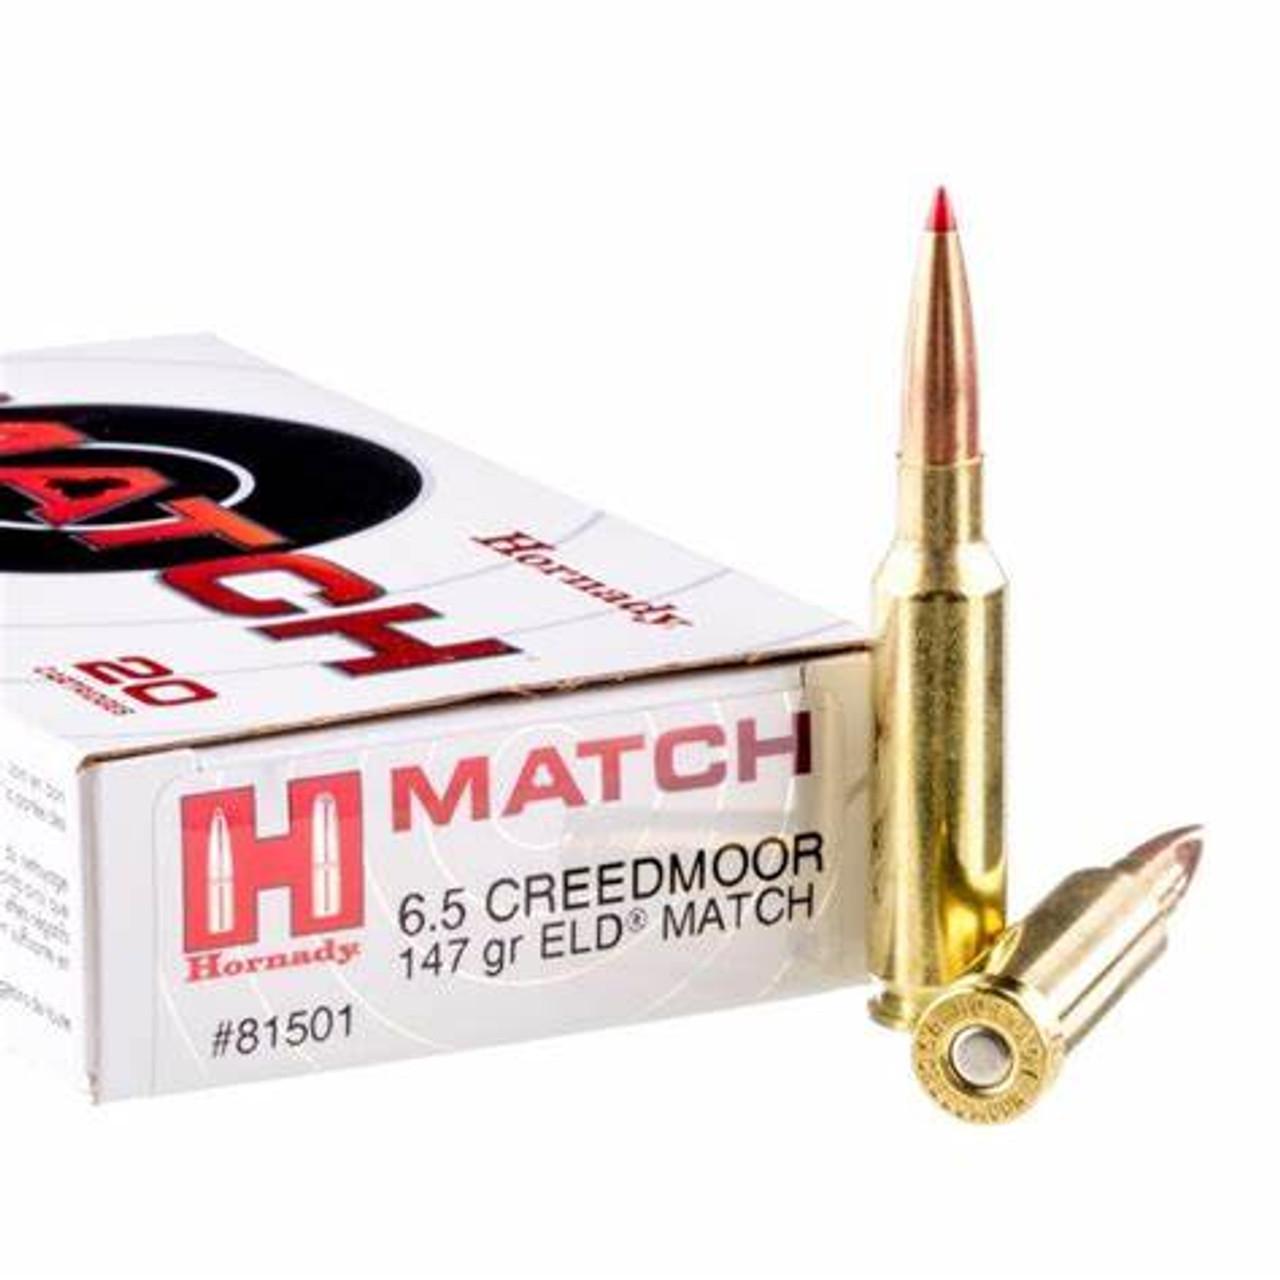 Cut Away
Product Features
THE PERFECT TIP!
The Heat Shield™ tip on the ELD® Match bullet creates the perfect meplat and outperforms BTHP bullets.

HORNADY® MATCH™ BULLETS
Hornady® Match™ rifle ammunition is loaded with the most accurate, consistent match bullets in the world, featuring our AMP® bullet jackets.

SPECIALLY SELECTED CASES
Cases are carefully selected based on strict criteria: wall thickness uniformity, internal capacity, case weight and consistent wall concentricity.

CAREFULLY MATCHED POWDER
Powder is matched carefully to each specific load for optimal pressure, velocity and consistent accuracy.

STRINGENT QUALITY CONTROL
With extremely tight tolerances and strict quality control, all Hornady® Match™ ammunition features superior lot-to-lot consistency. From the bullet seating to the optimal charges and velocities, Hornady® Match™ ammunition is designed to live up to company founder, J.W. Hornady's original goal: "Ten bullets through one hole."

TEST BARREL (24")
MUZZLE
100 YARDS
200 YARDS
300 YARDS
400 YARDS
500 YARDS
VELOCITY
(FPS)
ENERGY
(FT/LB)
TRAJECTORY
(INCHES)
2695
2370
-1.5
2567
2151
1.9
2443
1948
0
2323
1761
-7.7
2206
1587
-21.9
2092
1428
-43.2